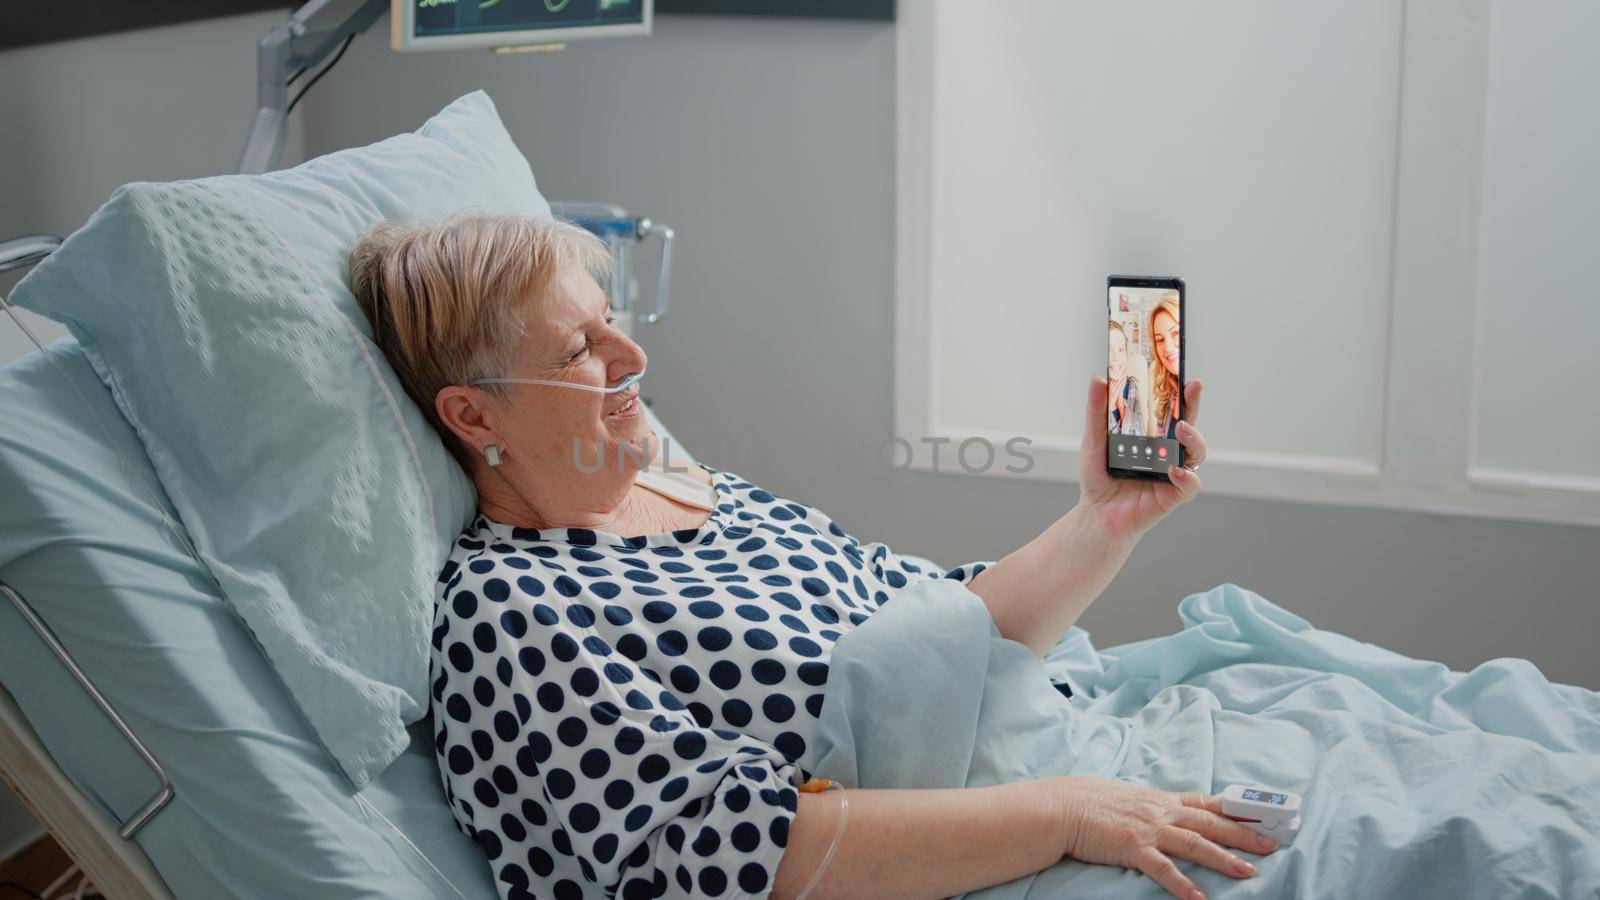 Senior patient talking to family on video call in hospital ward bed. Woman with sickness using smartphone and online video conference for remote communication with niece and daughter.